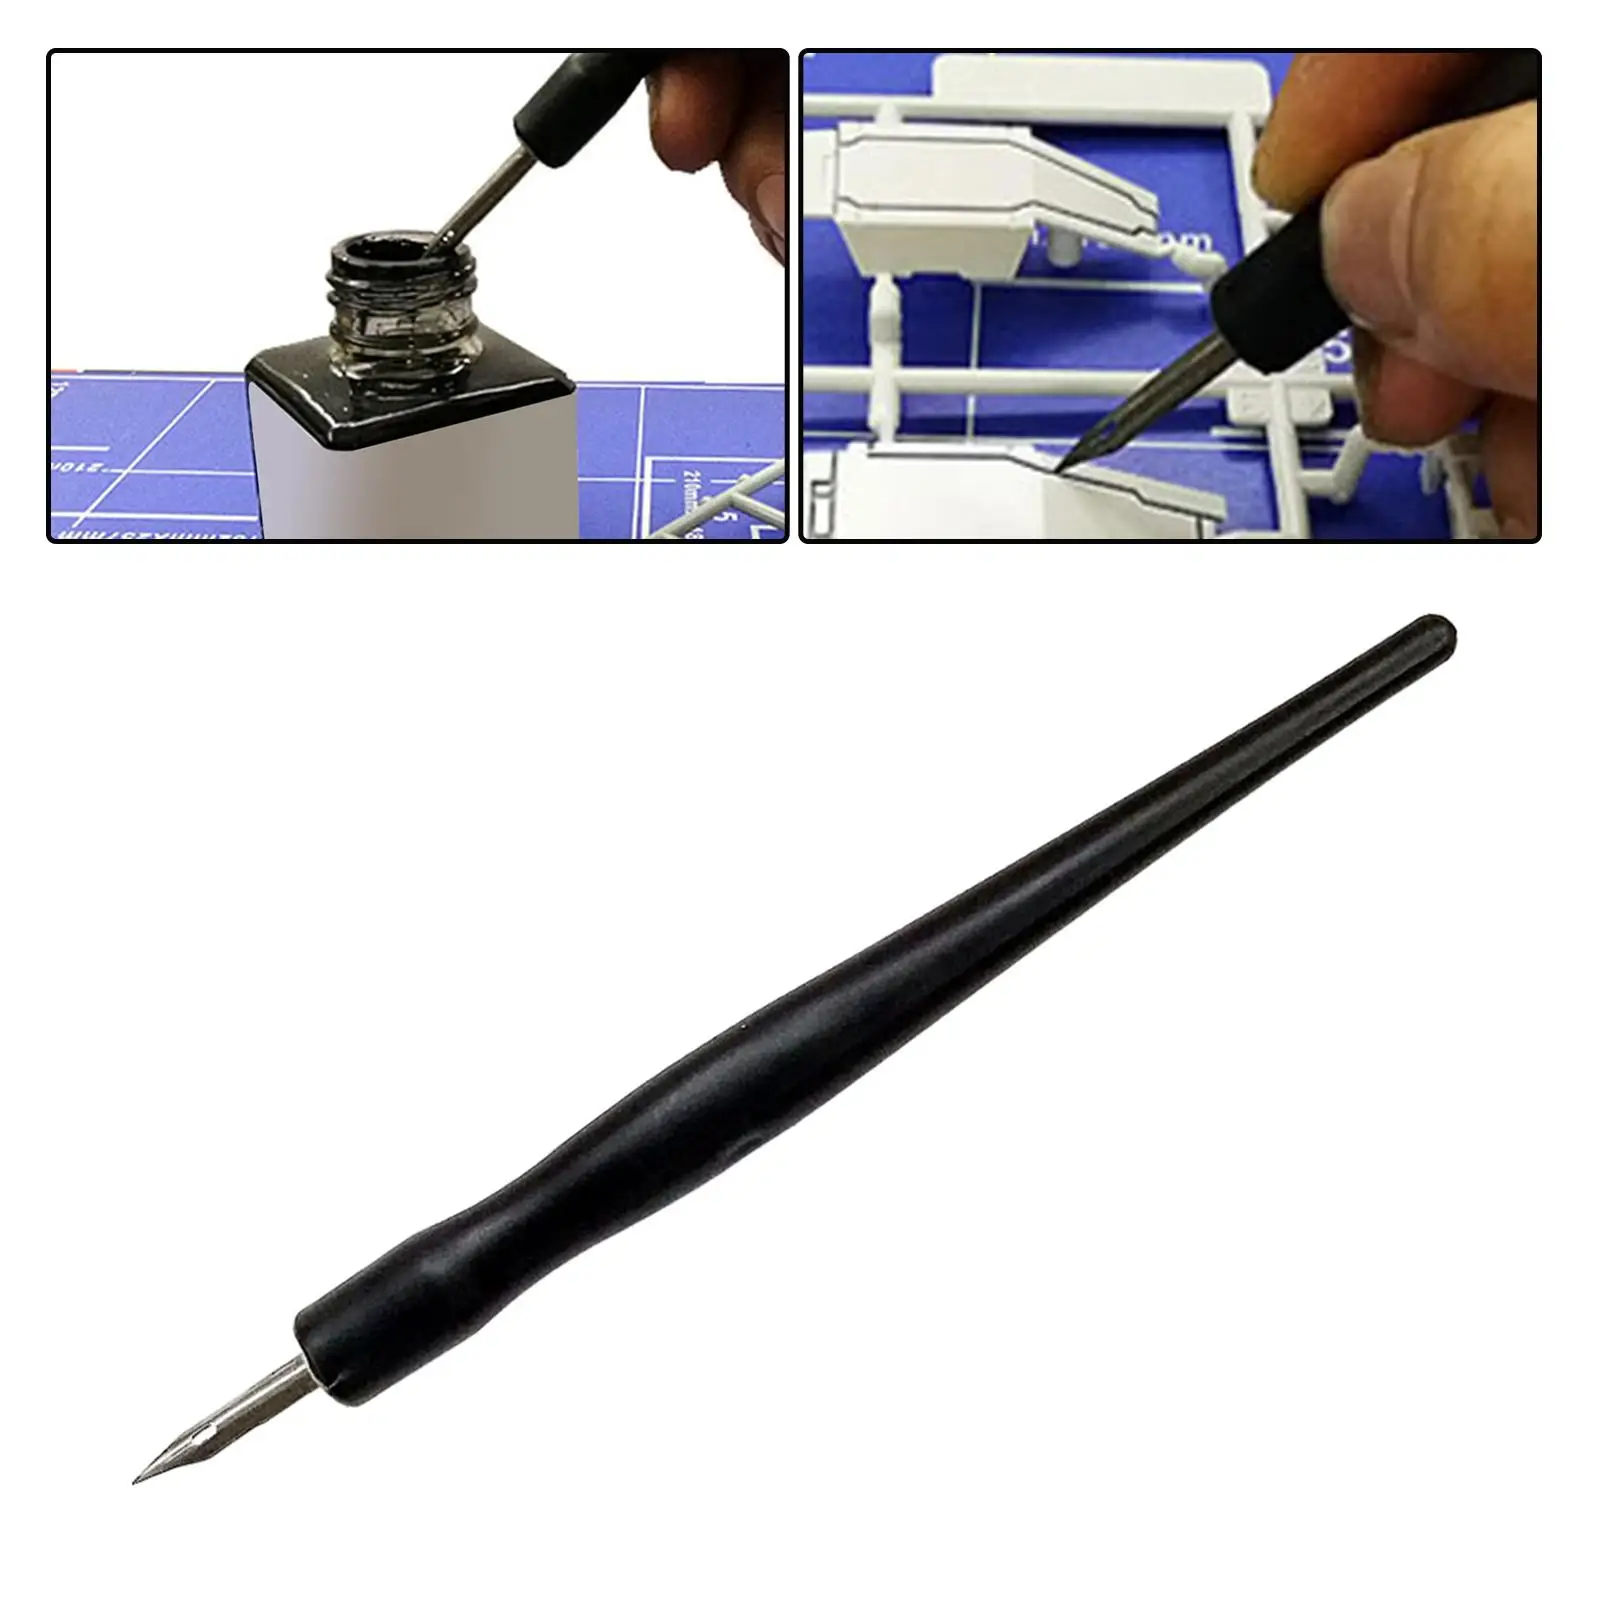 Panel Line Accent Pen Assembly Model Tool Model Painting Tool Permeation Pen Leaking Pen Infiltration Line Pen Accessory Crafts